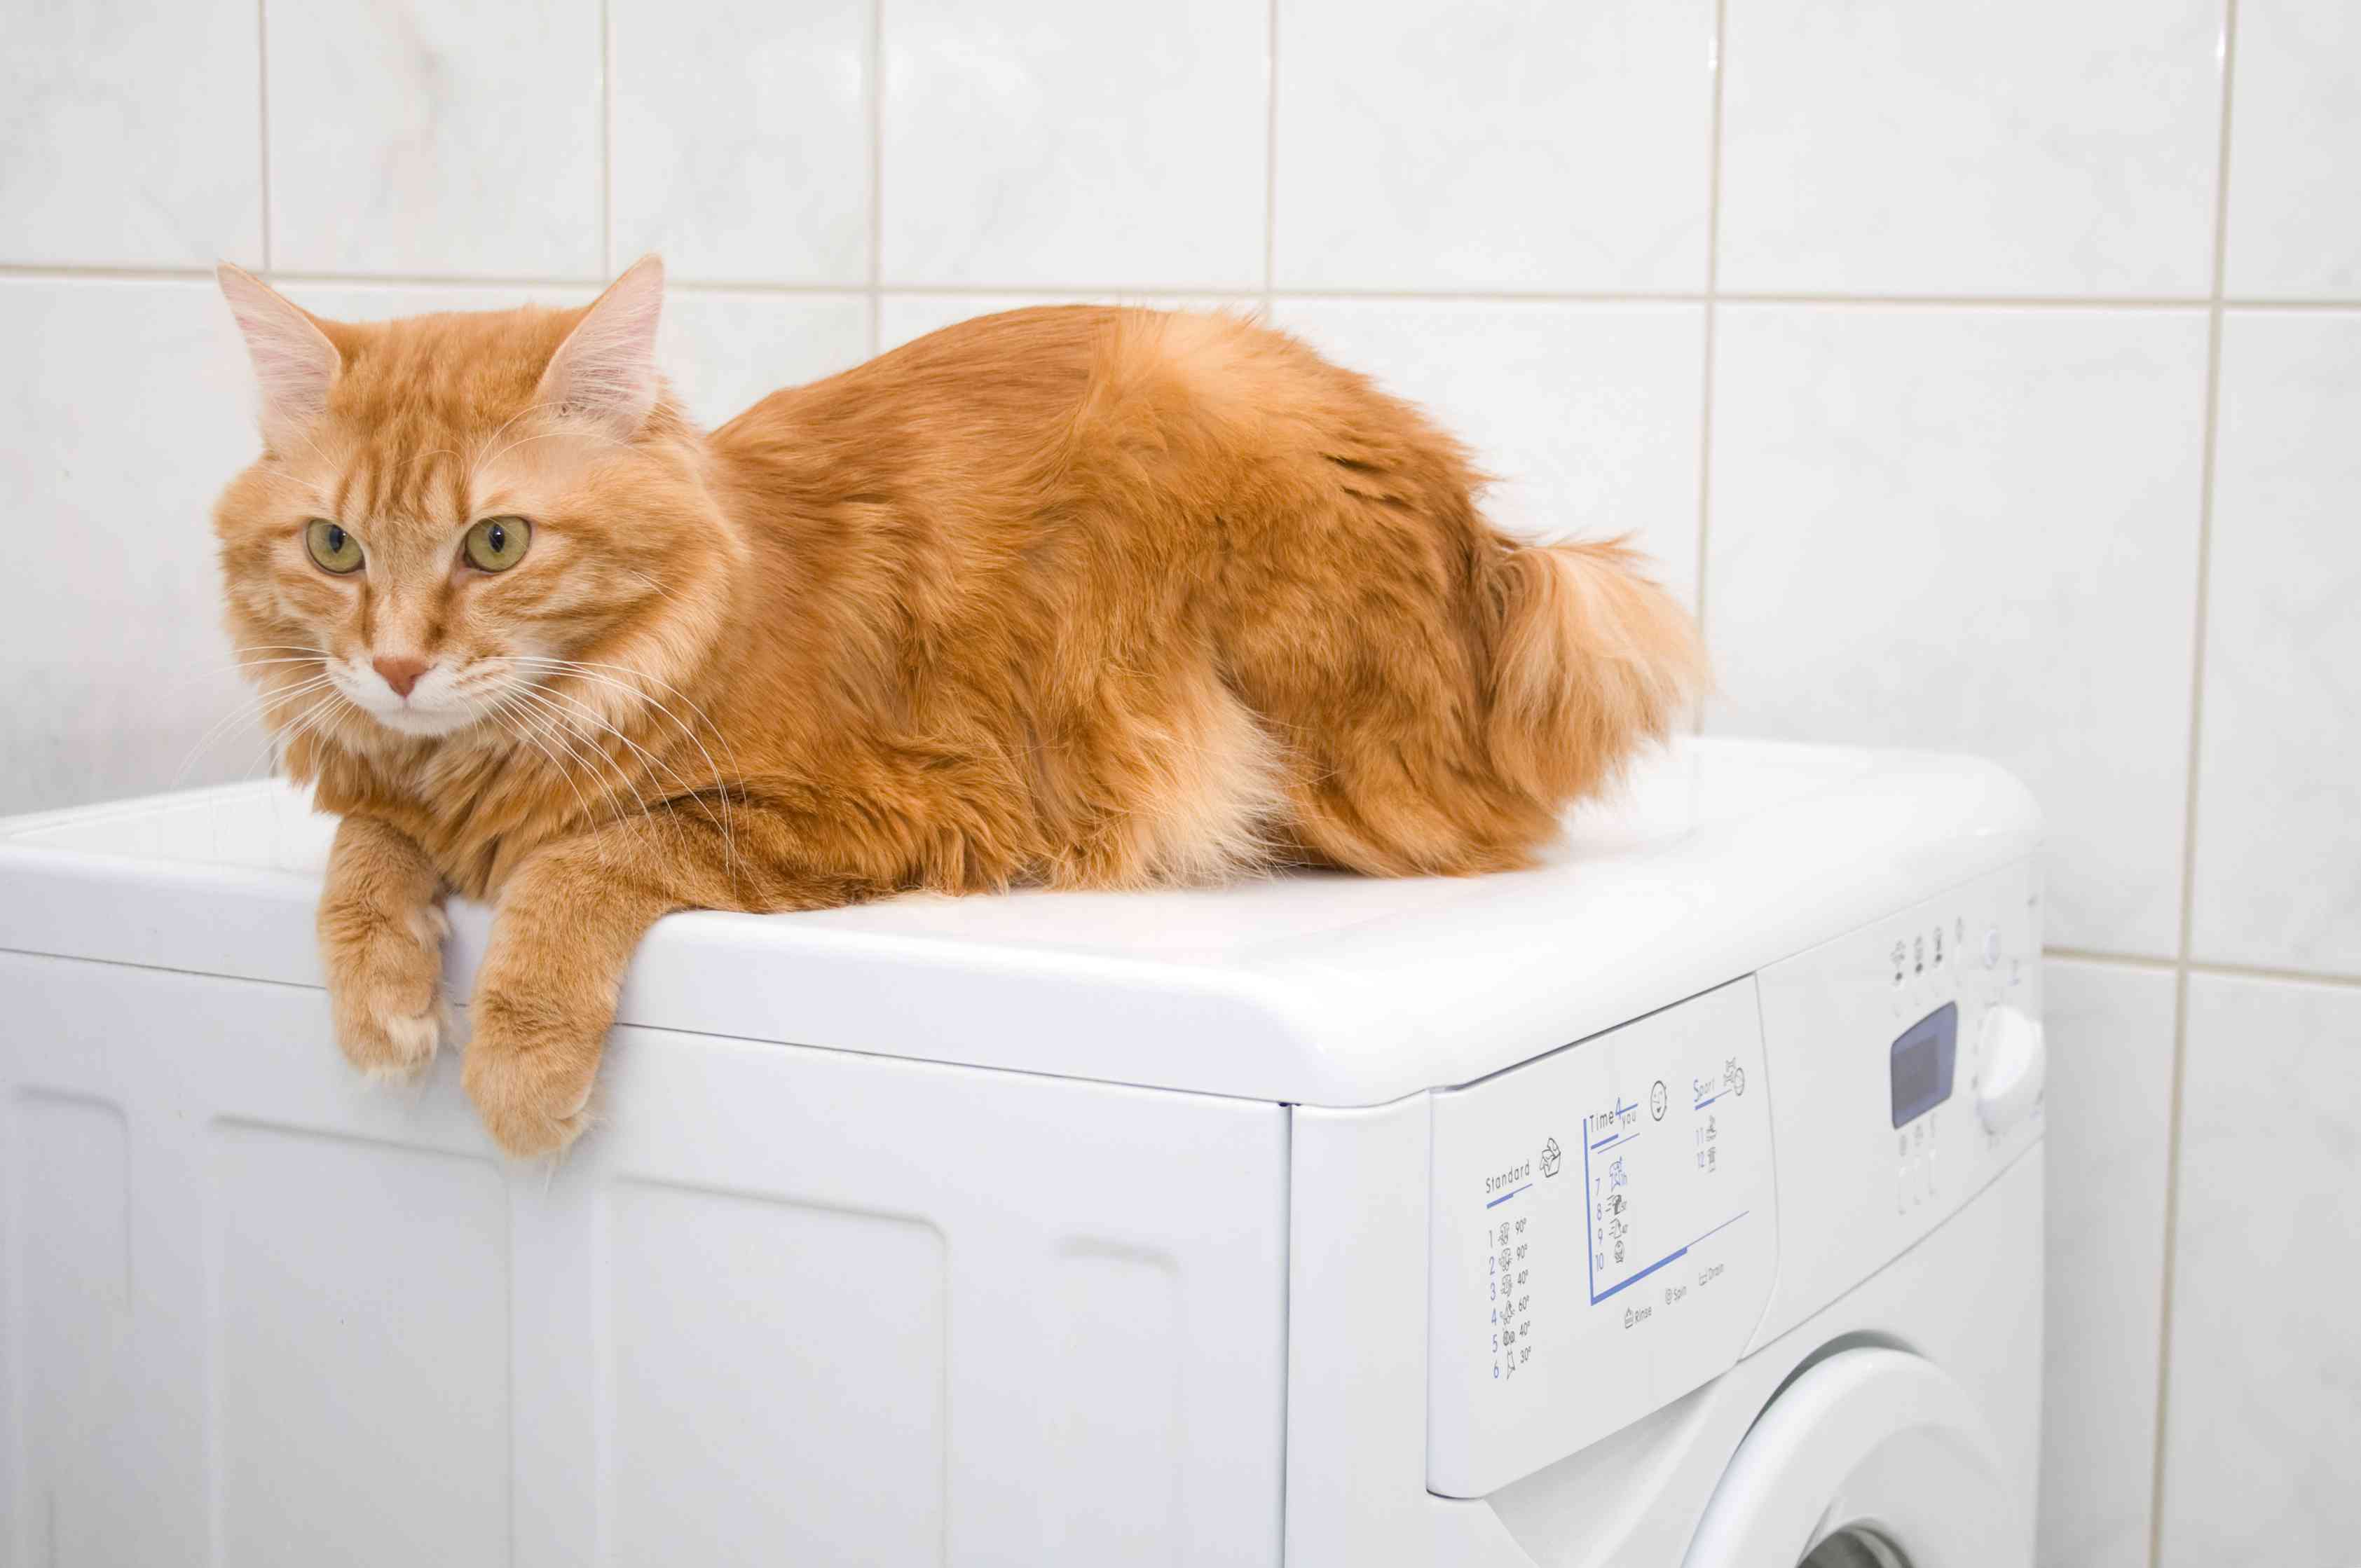 An orange cat with a short, bobbed tail laying on a washing machine.